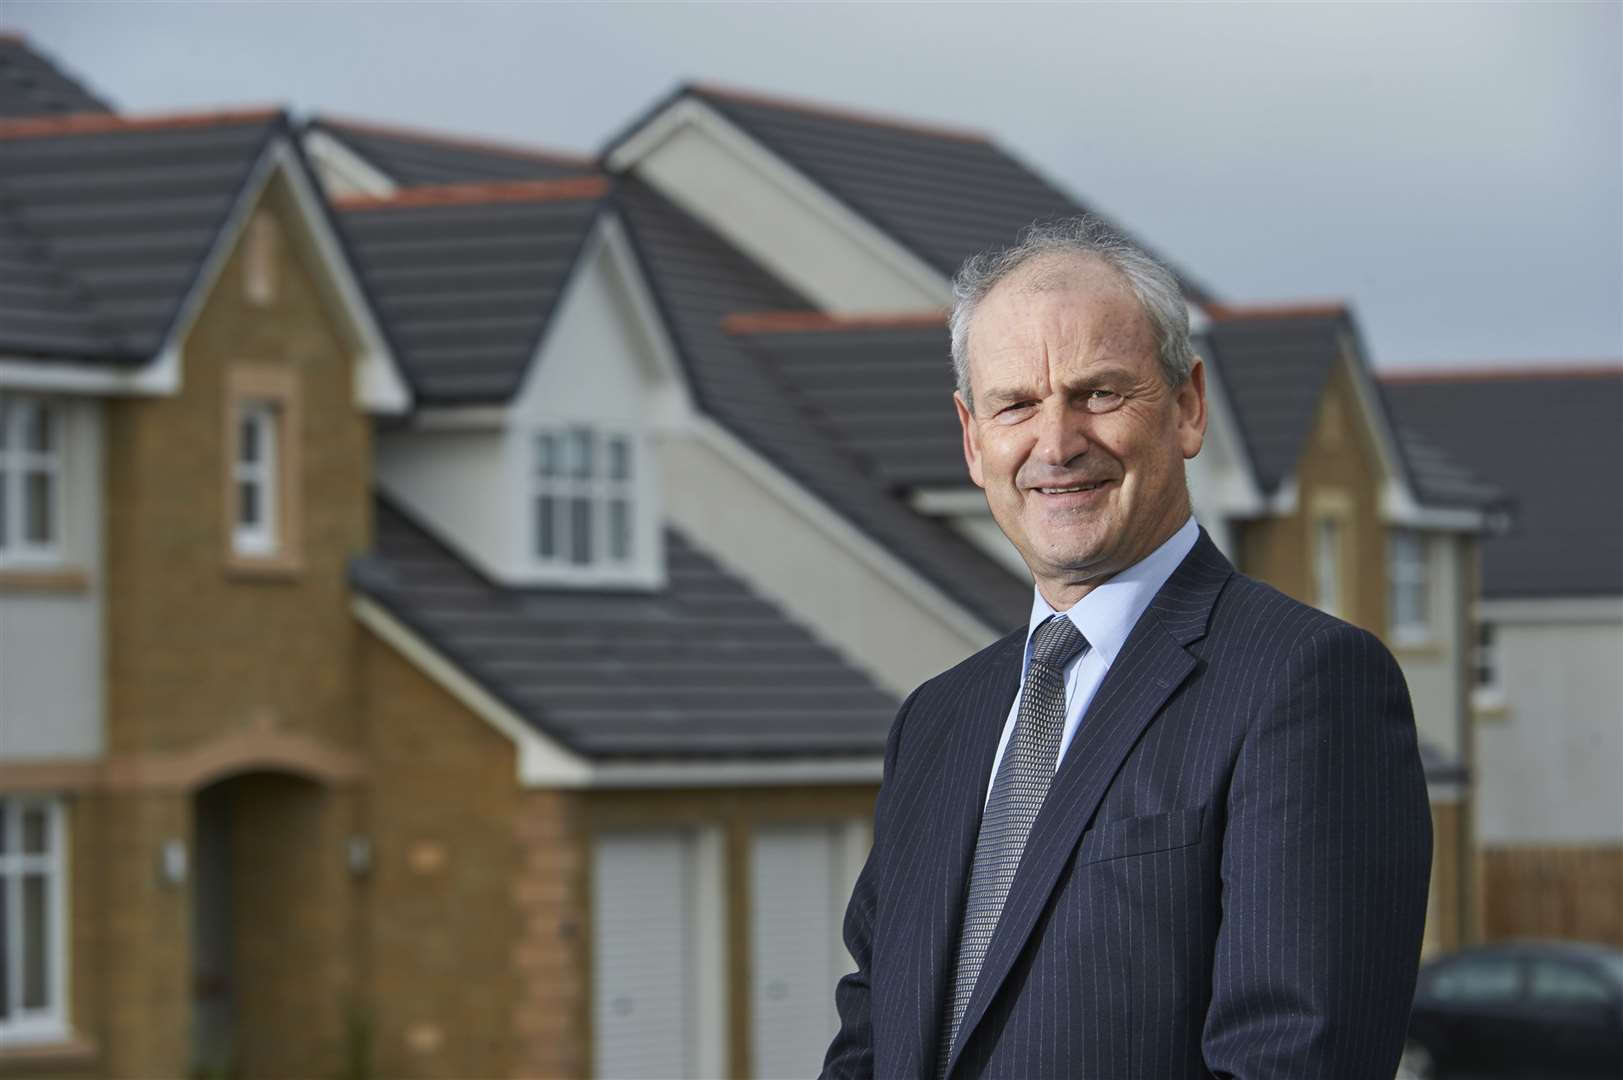 Tulloch Homes chief executive of George Fraser.